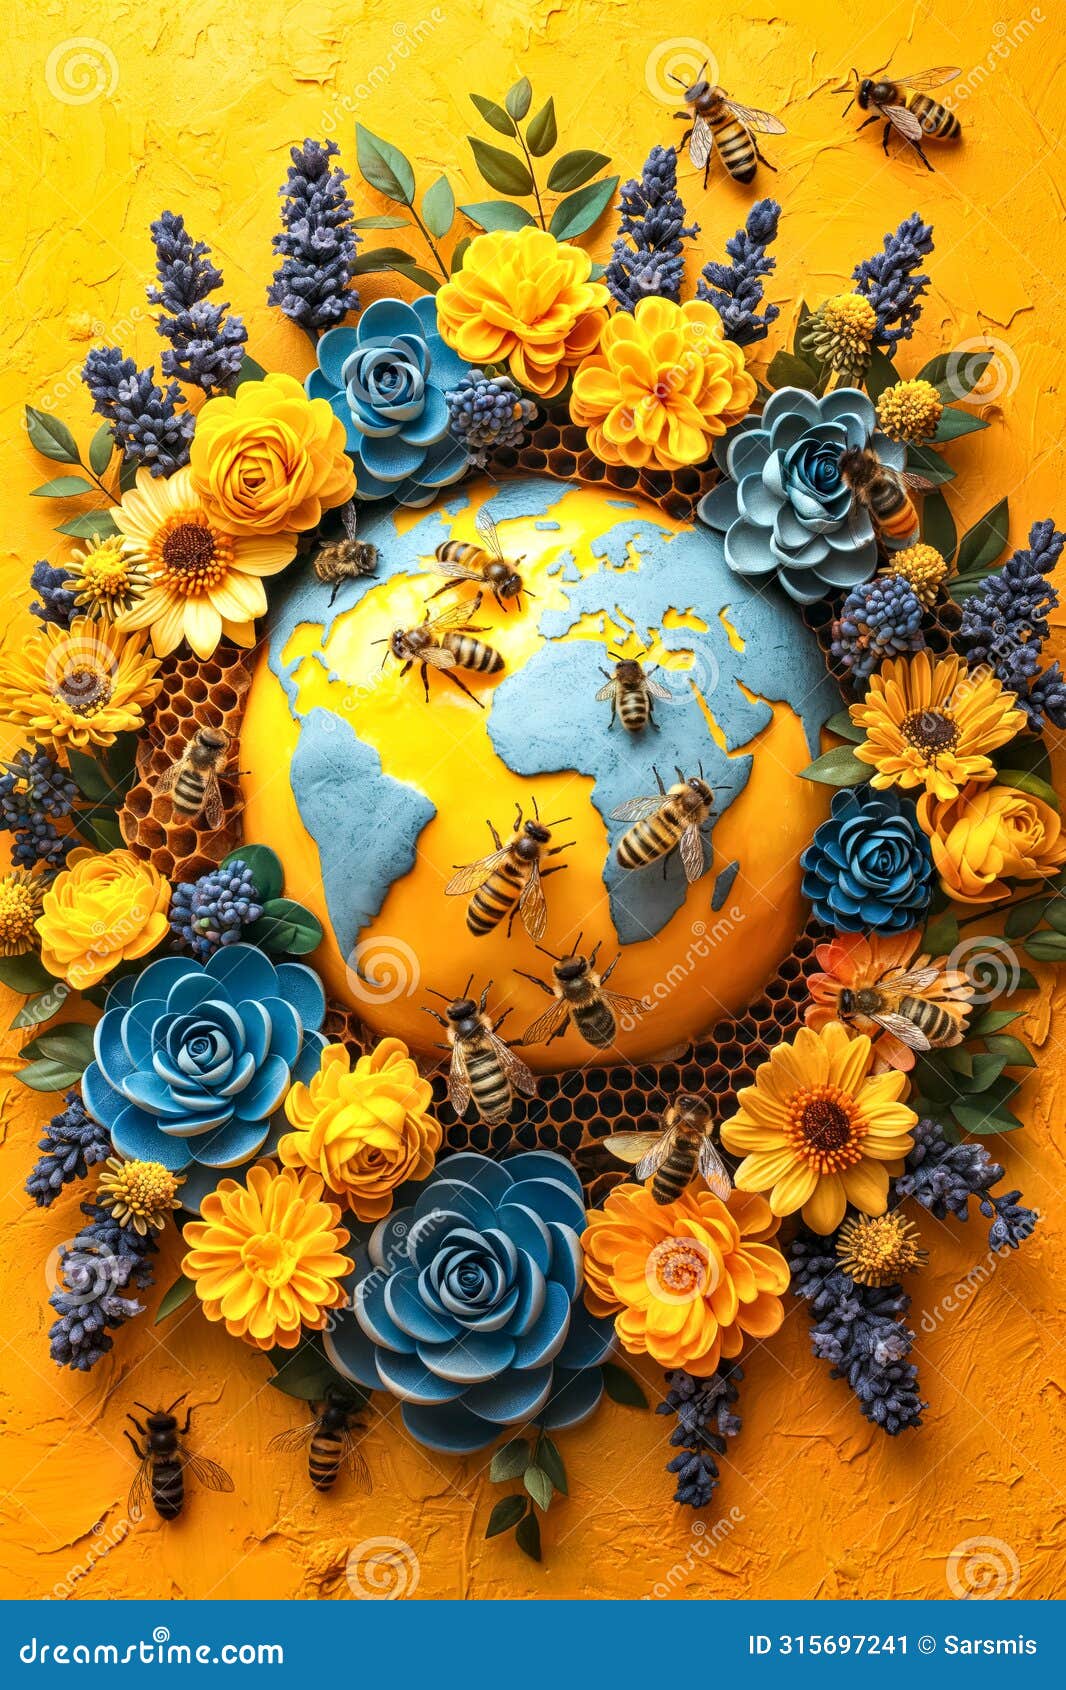 bees around a floral globe, izing global biodiversity and the essential role of pollinators in our ecosystem. may 20, world